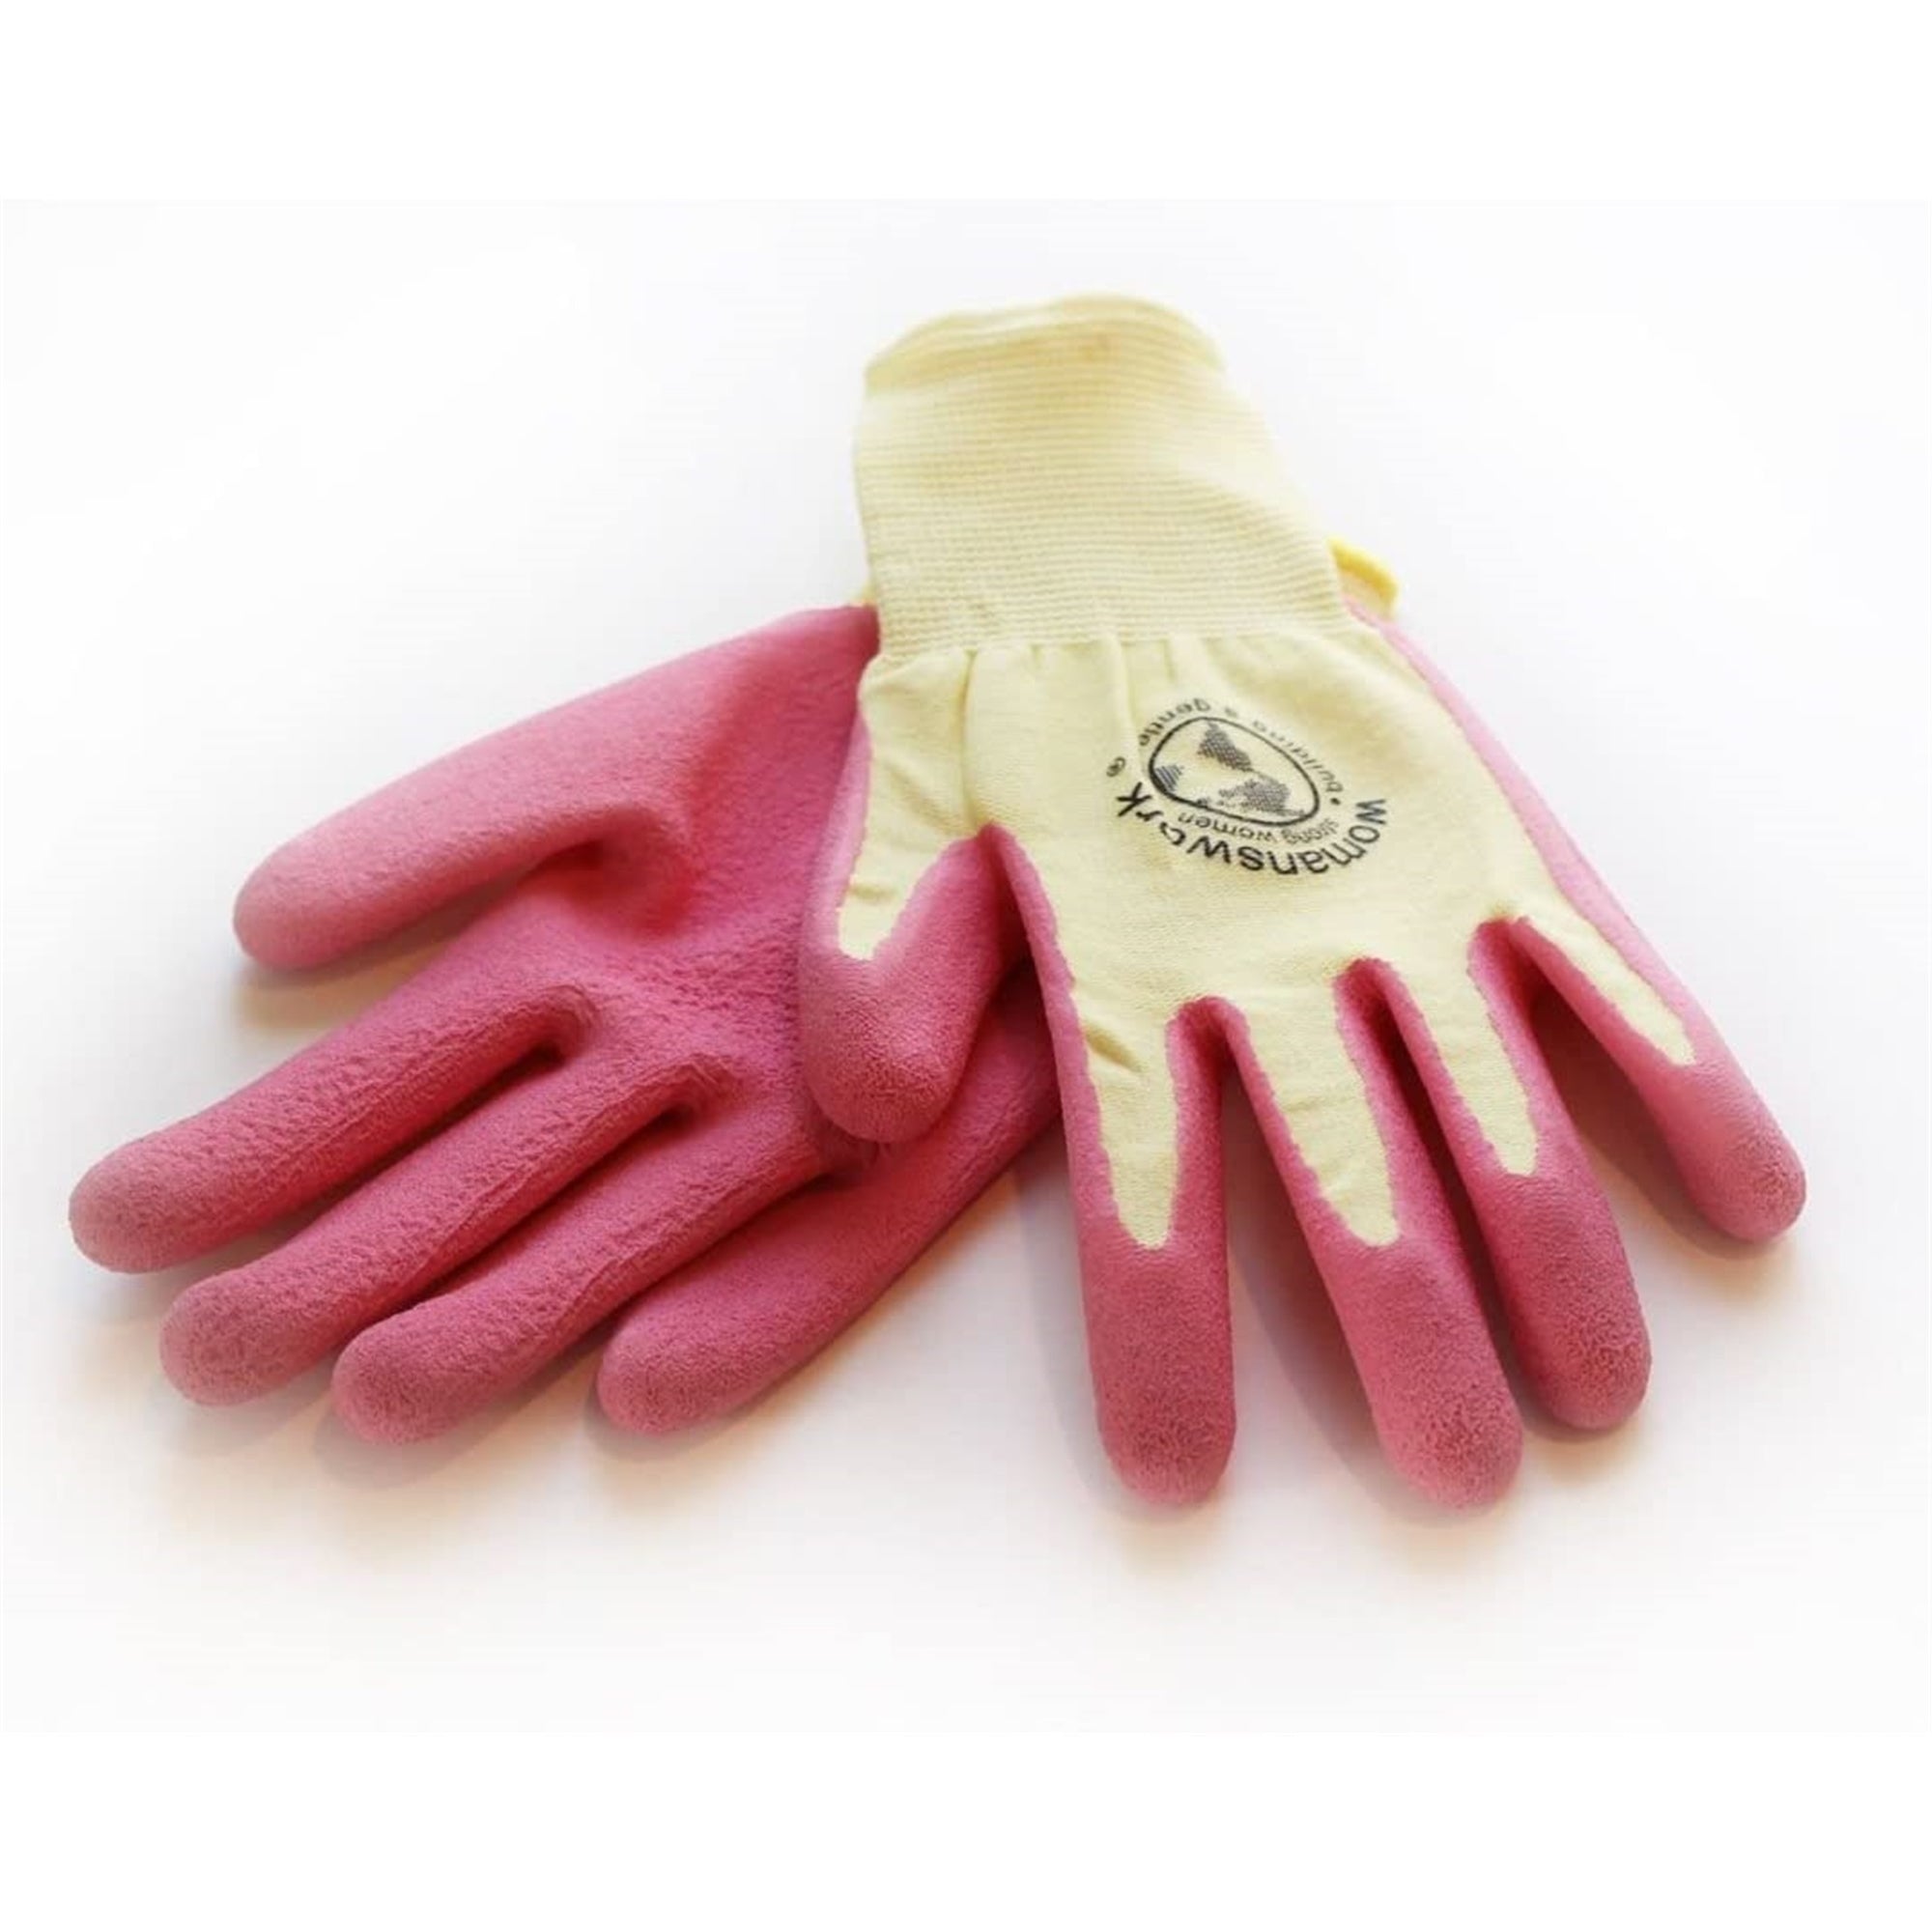 Womanswork Gardening Protective Weeding Gloves, Pink, Small (Pack of 1)